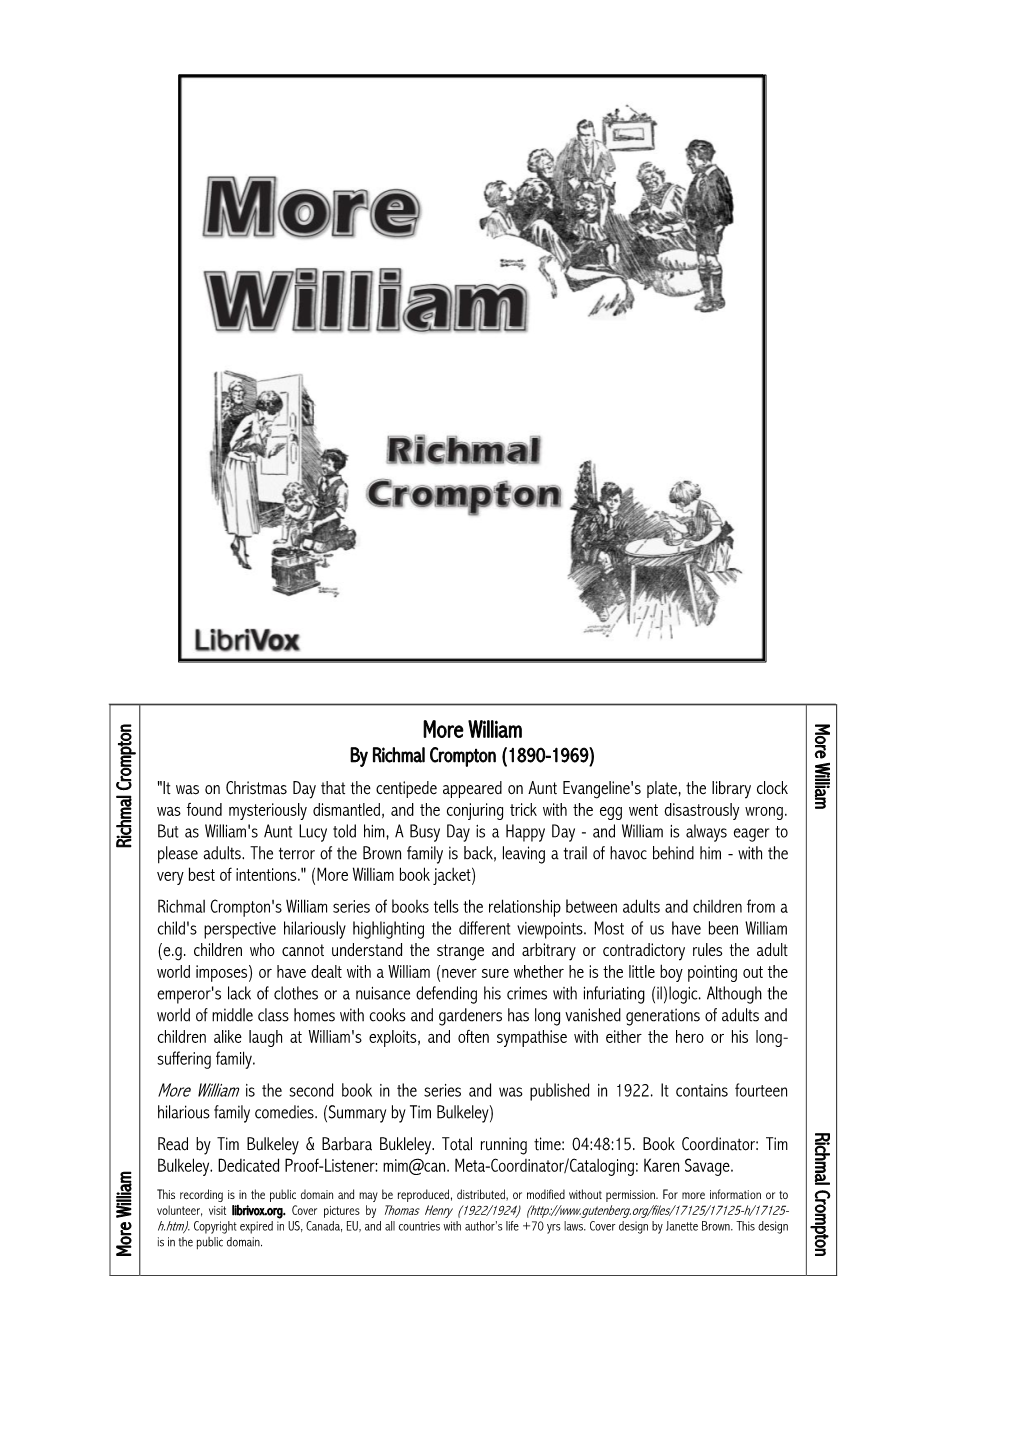 More William More More William by Richmal Crompton (1890-1969) "It Was on Christmas Day That the Centipede Appeared on Aunt Evangeline's Plate, the Library Clock